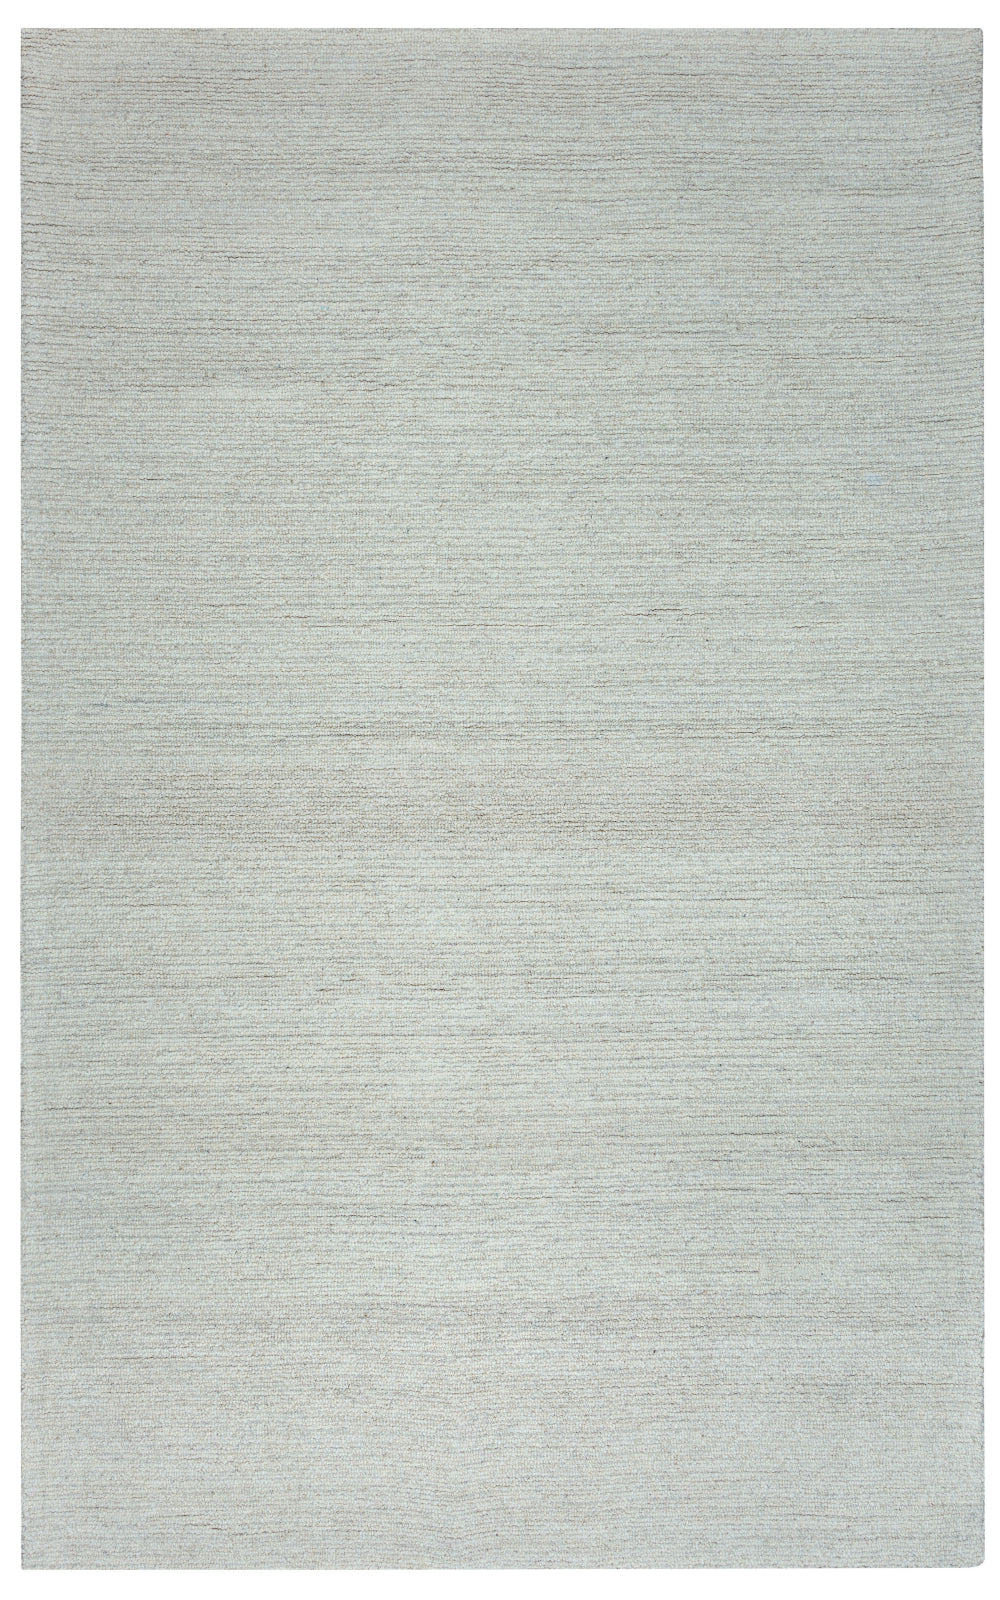 Rizzy Country CT1357 Off White Area Rug main image